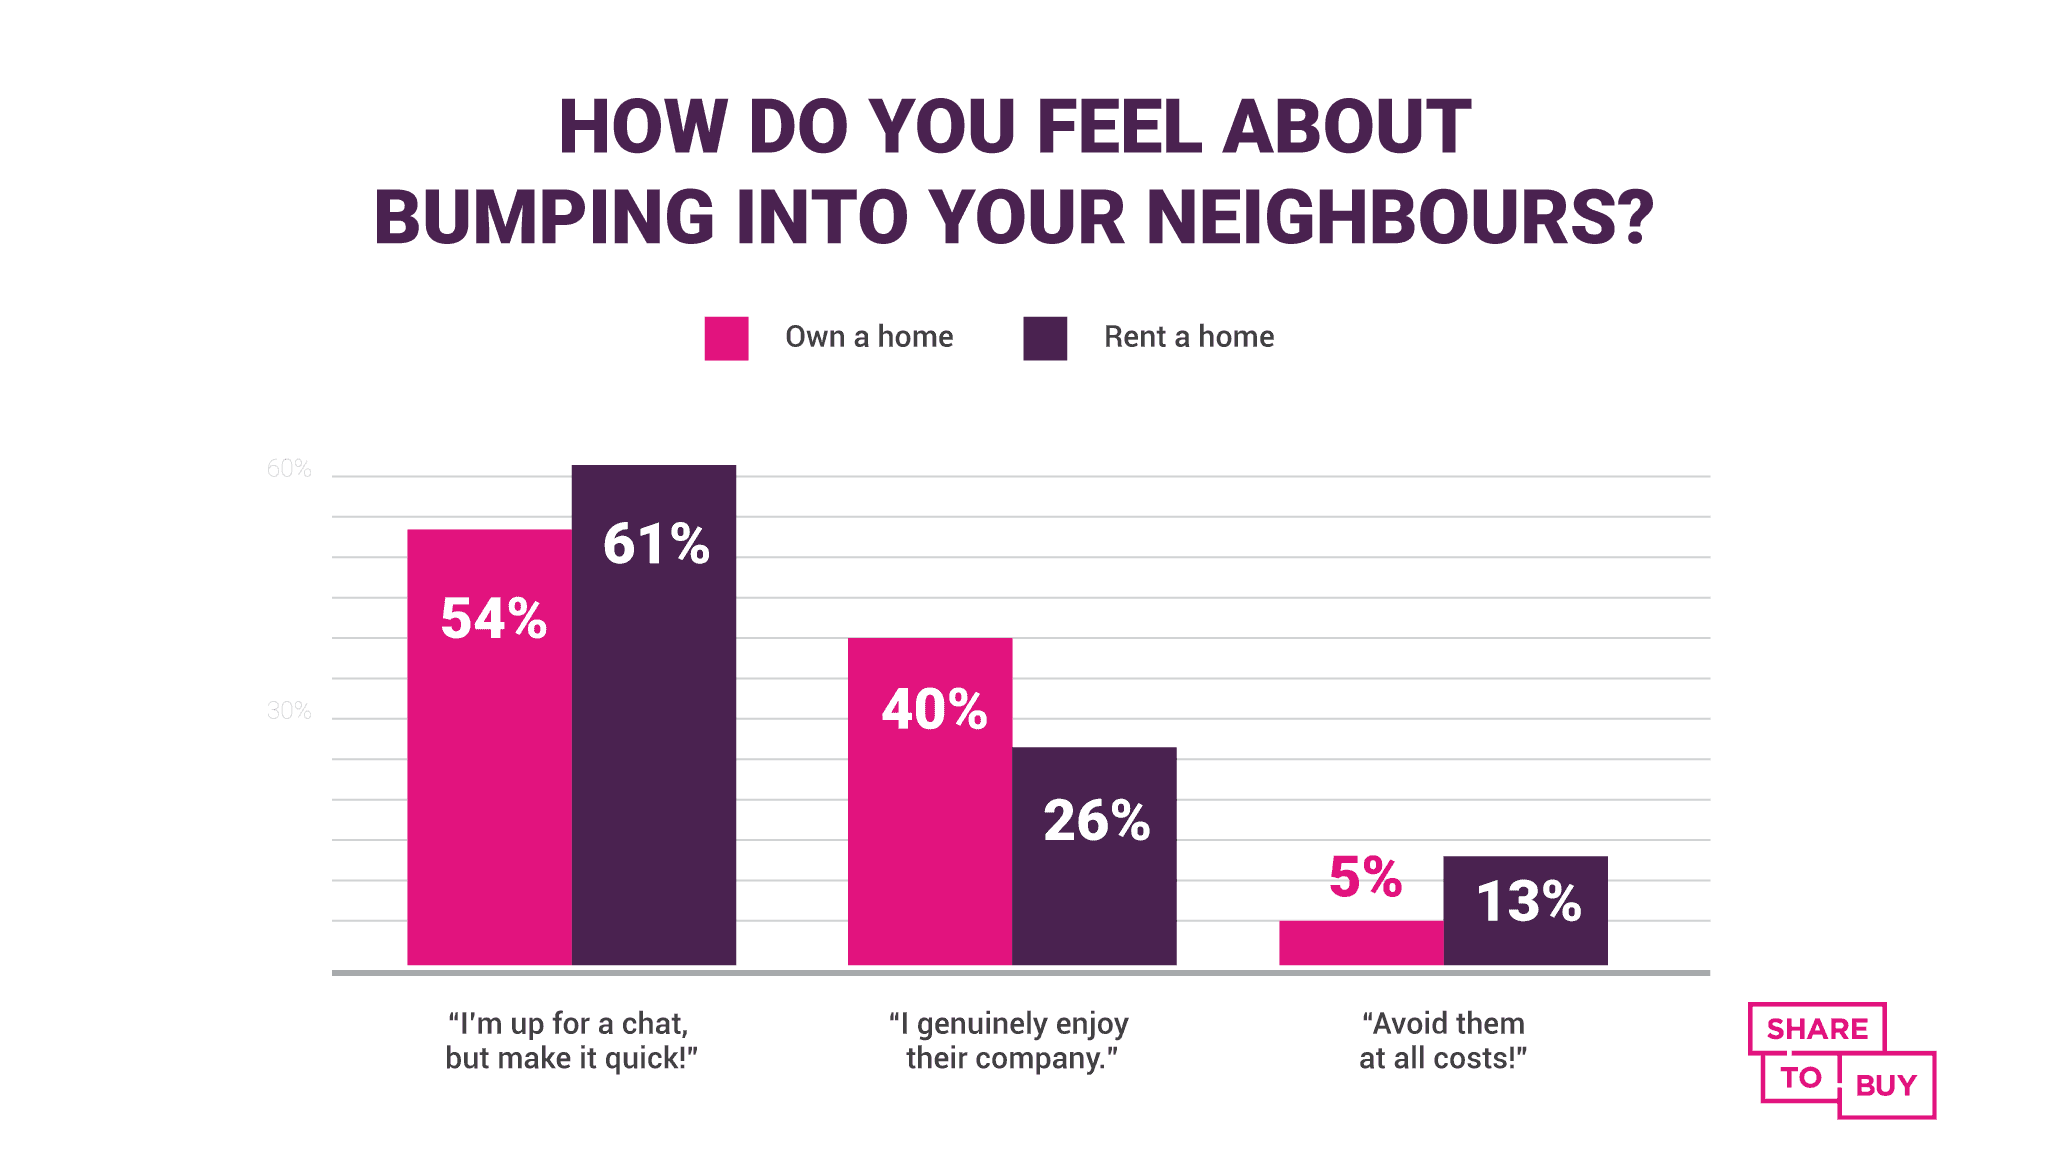 A graphic showing how British people feel about bumping into their neighbours, split by renters and homeowners